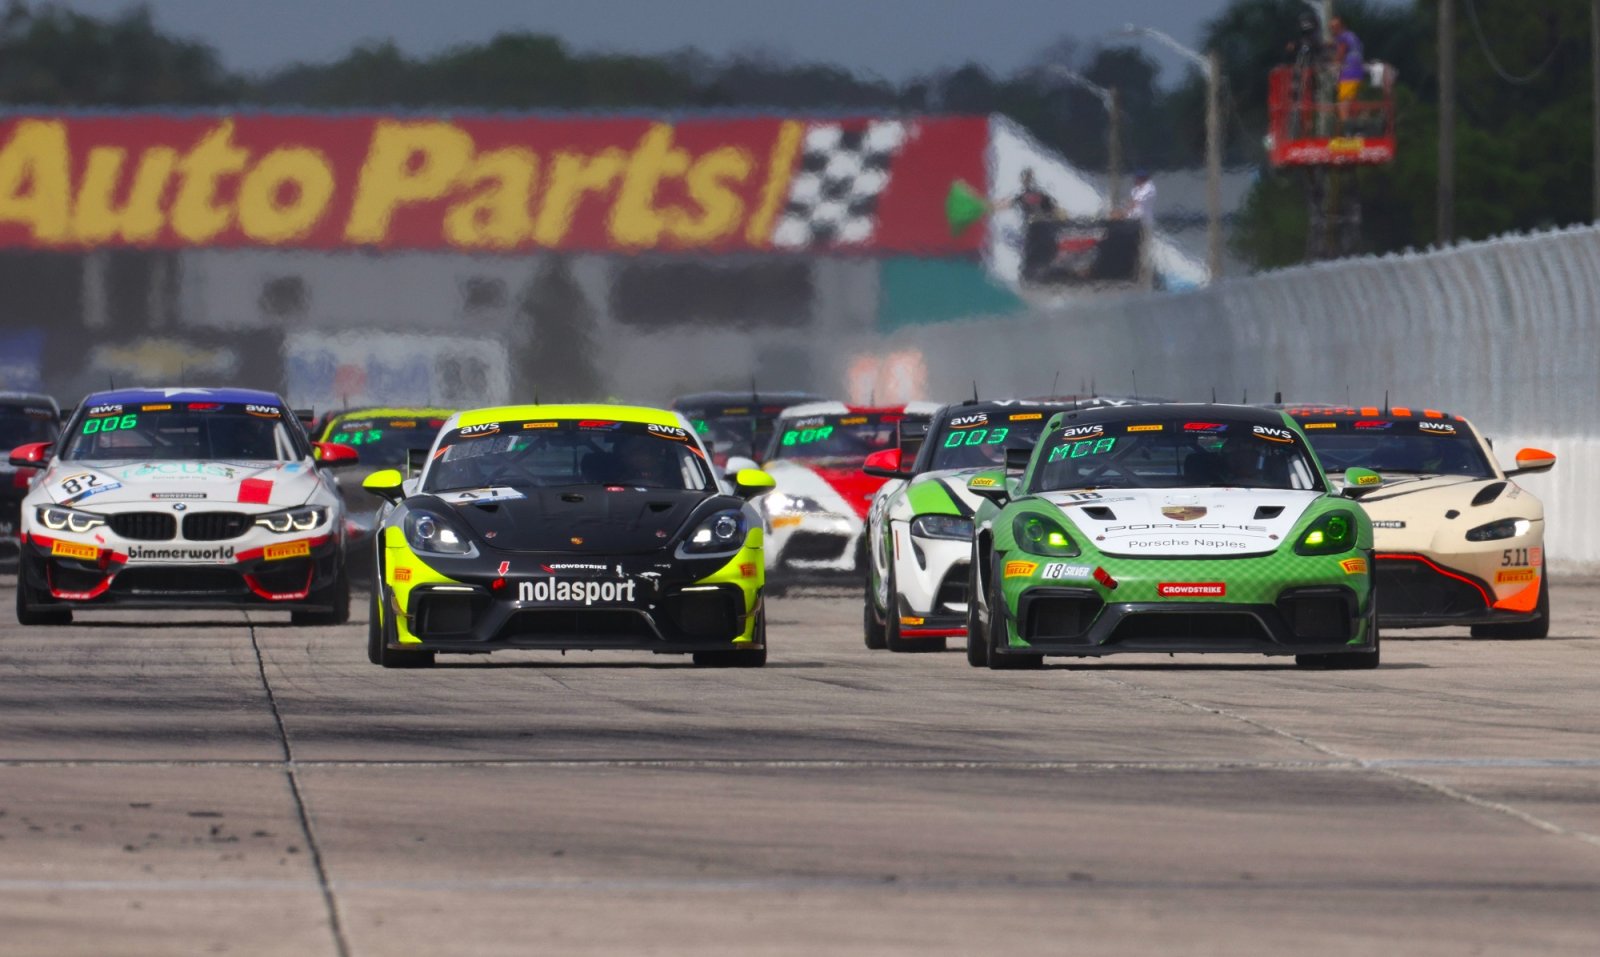 RS1 Porsche Returns to Winners Circle, Nolasport Takes Pro-Am Points Lead With A Solid Win, Random Vandals Claim Their First Win of the Season at Sebring